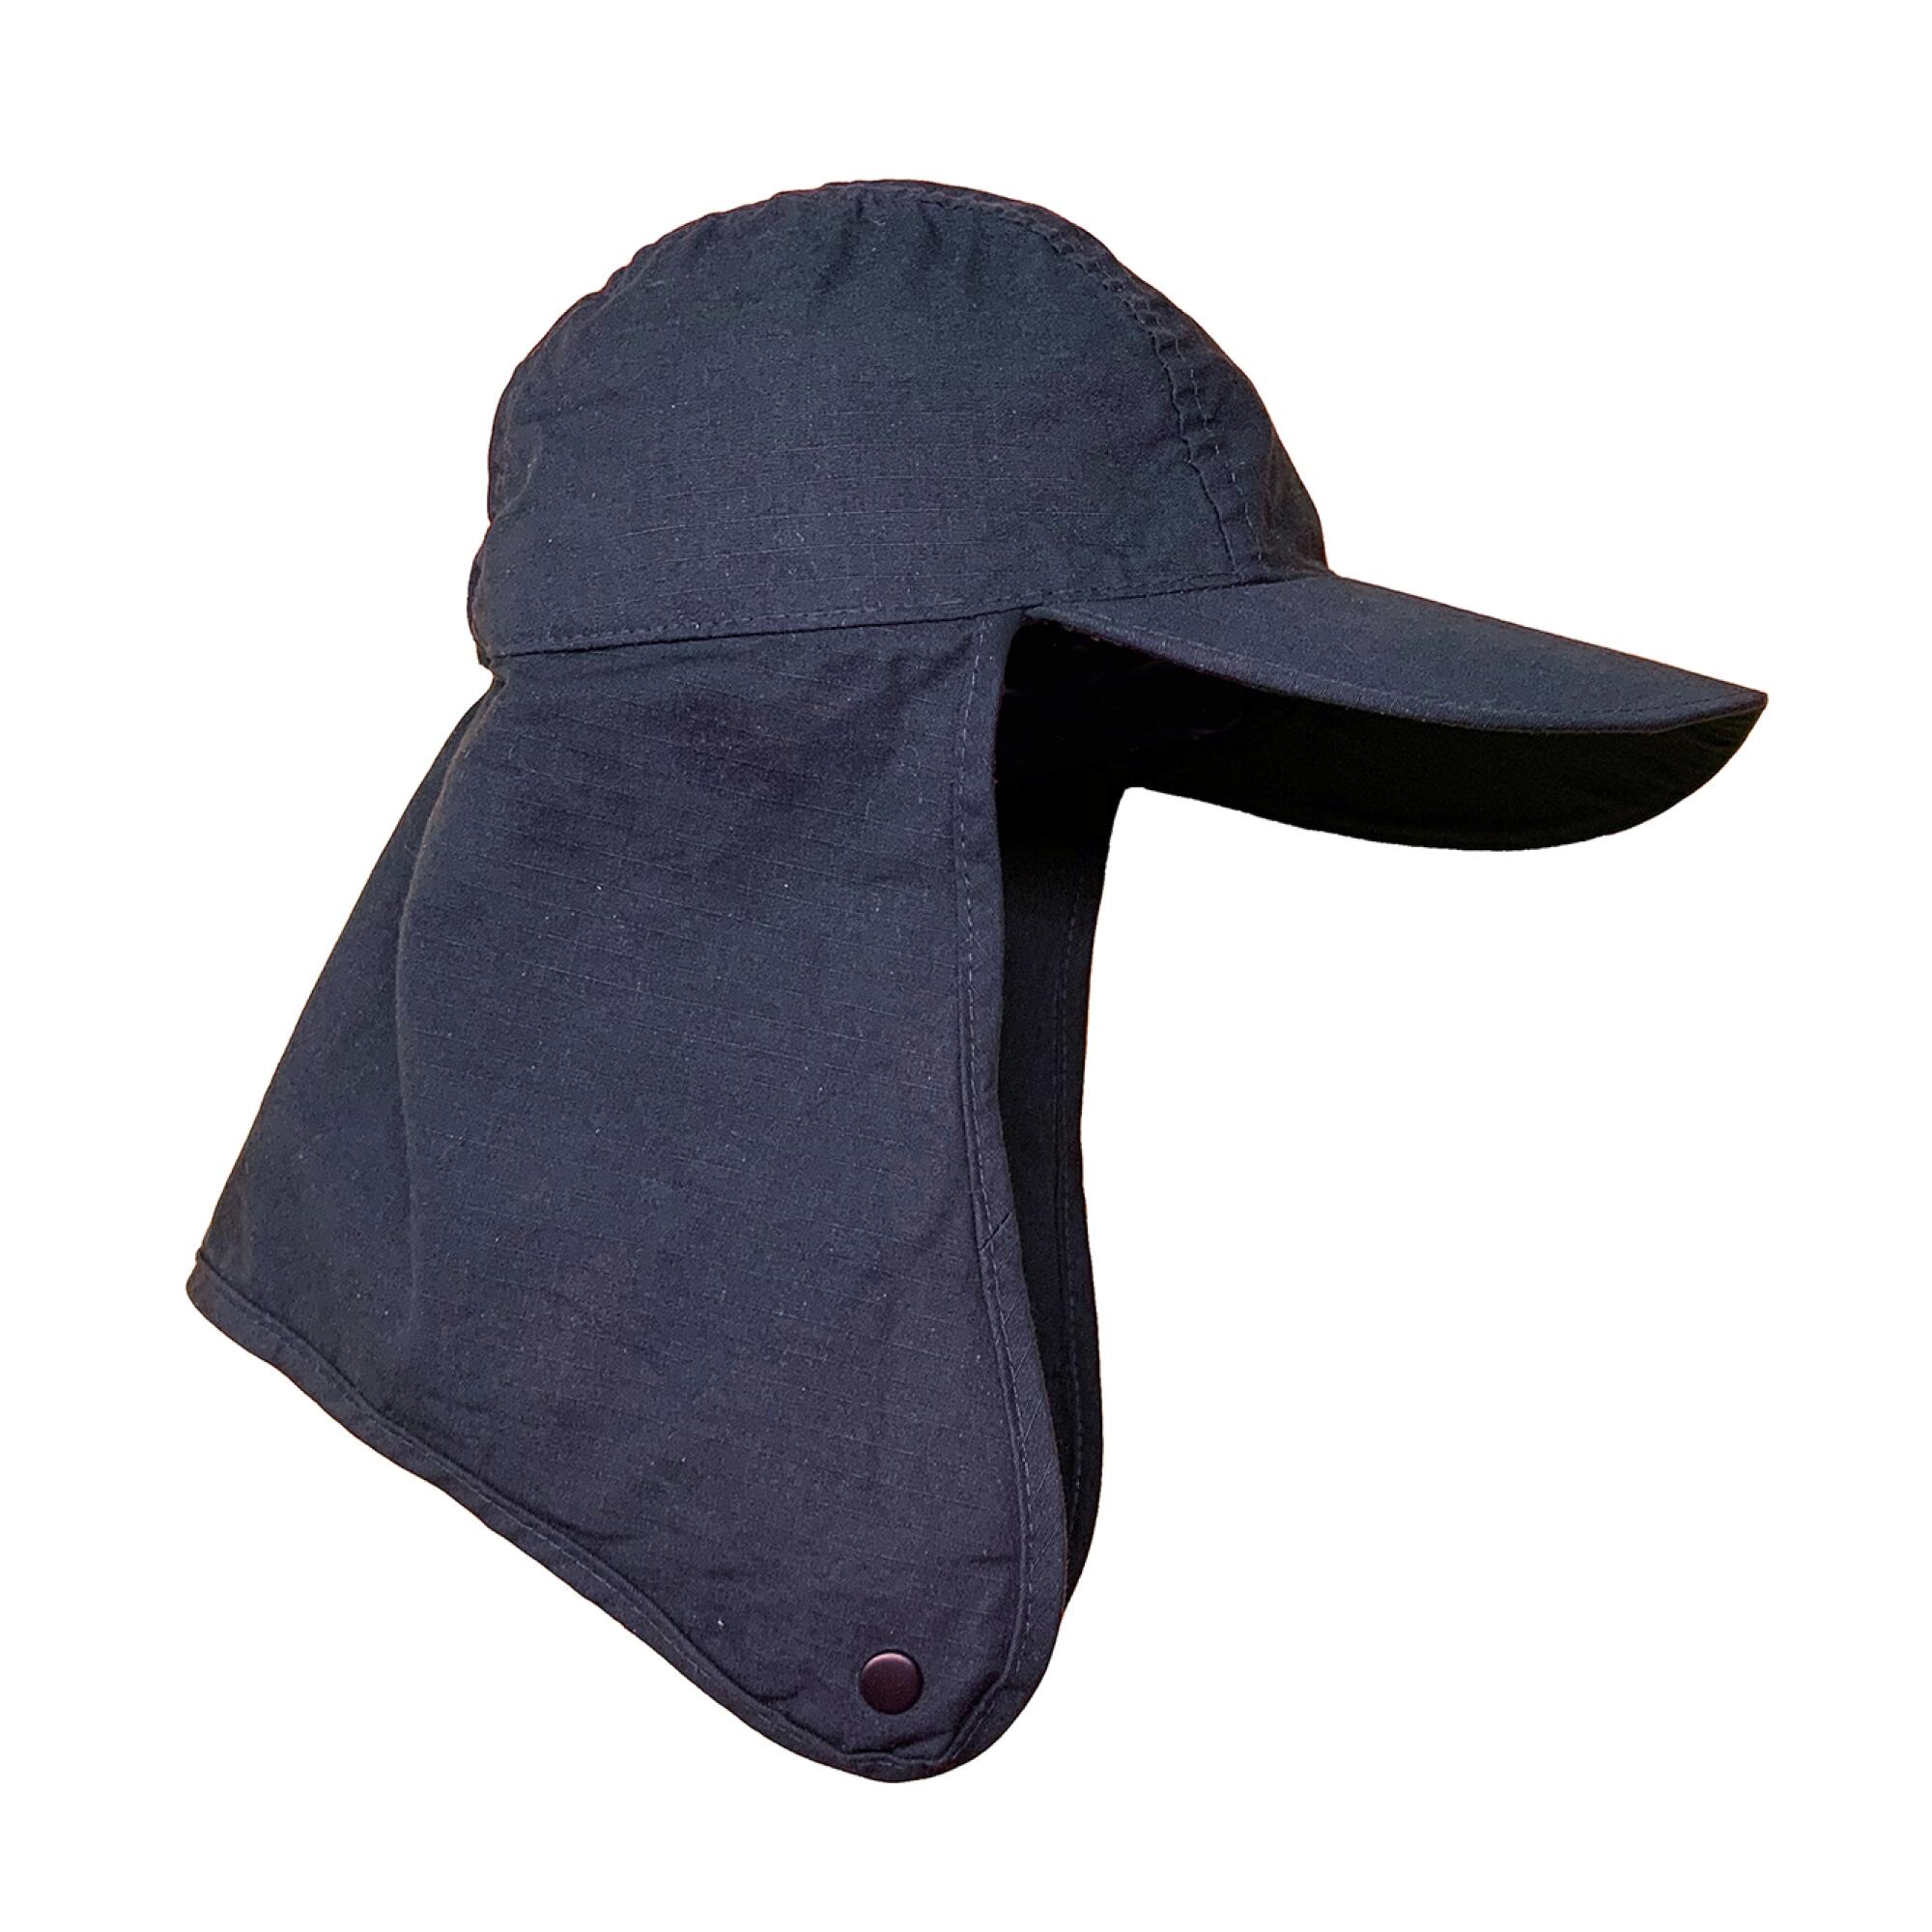 Flap hat for gardeners (protects neck) from Plant Material.